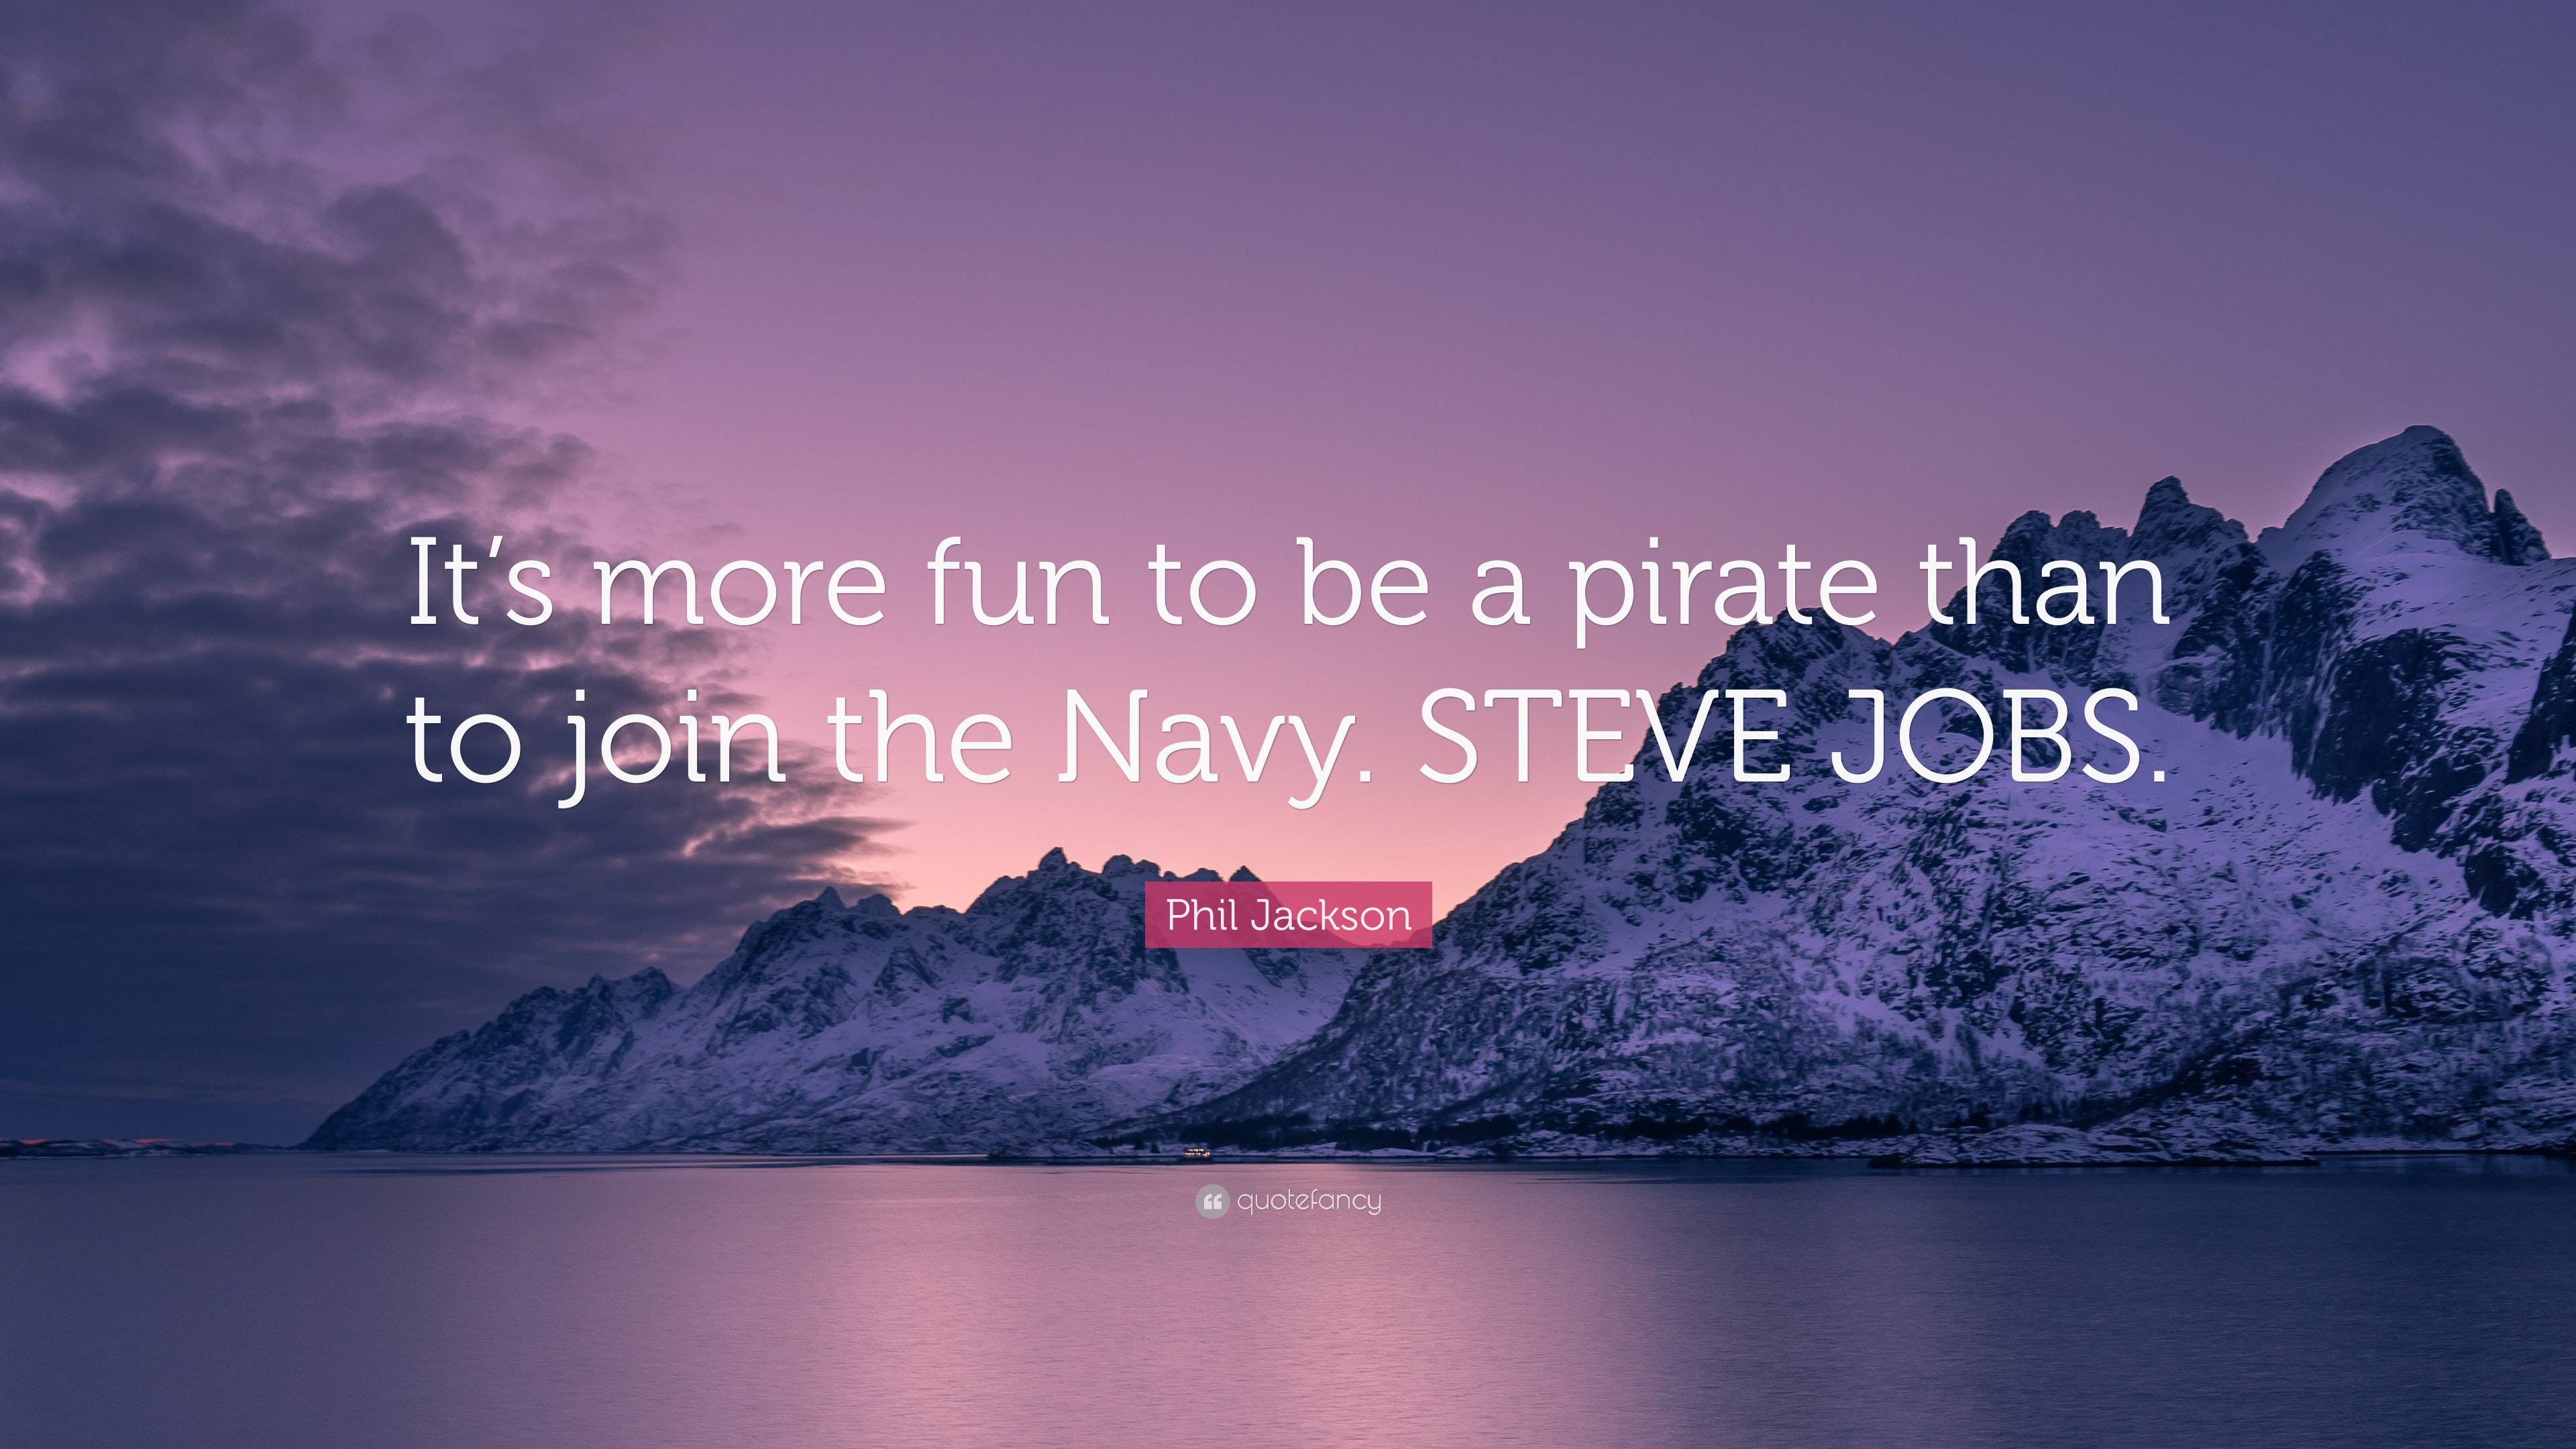 Phil Jackson Quote: “It's more fun to be a pirate than to join the Navy. STEVE